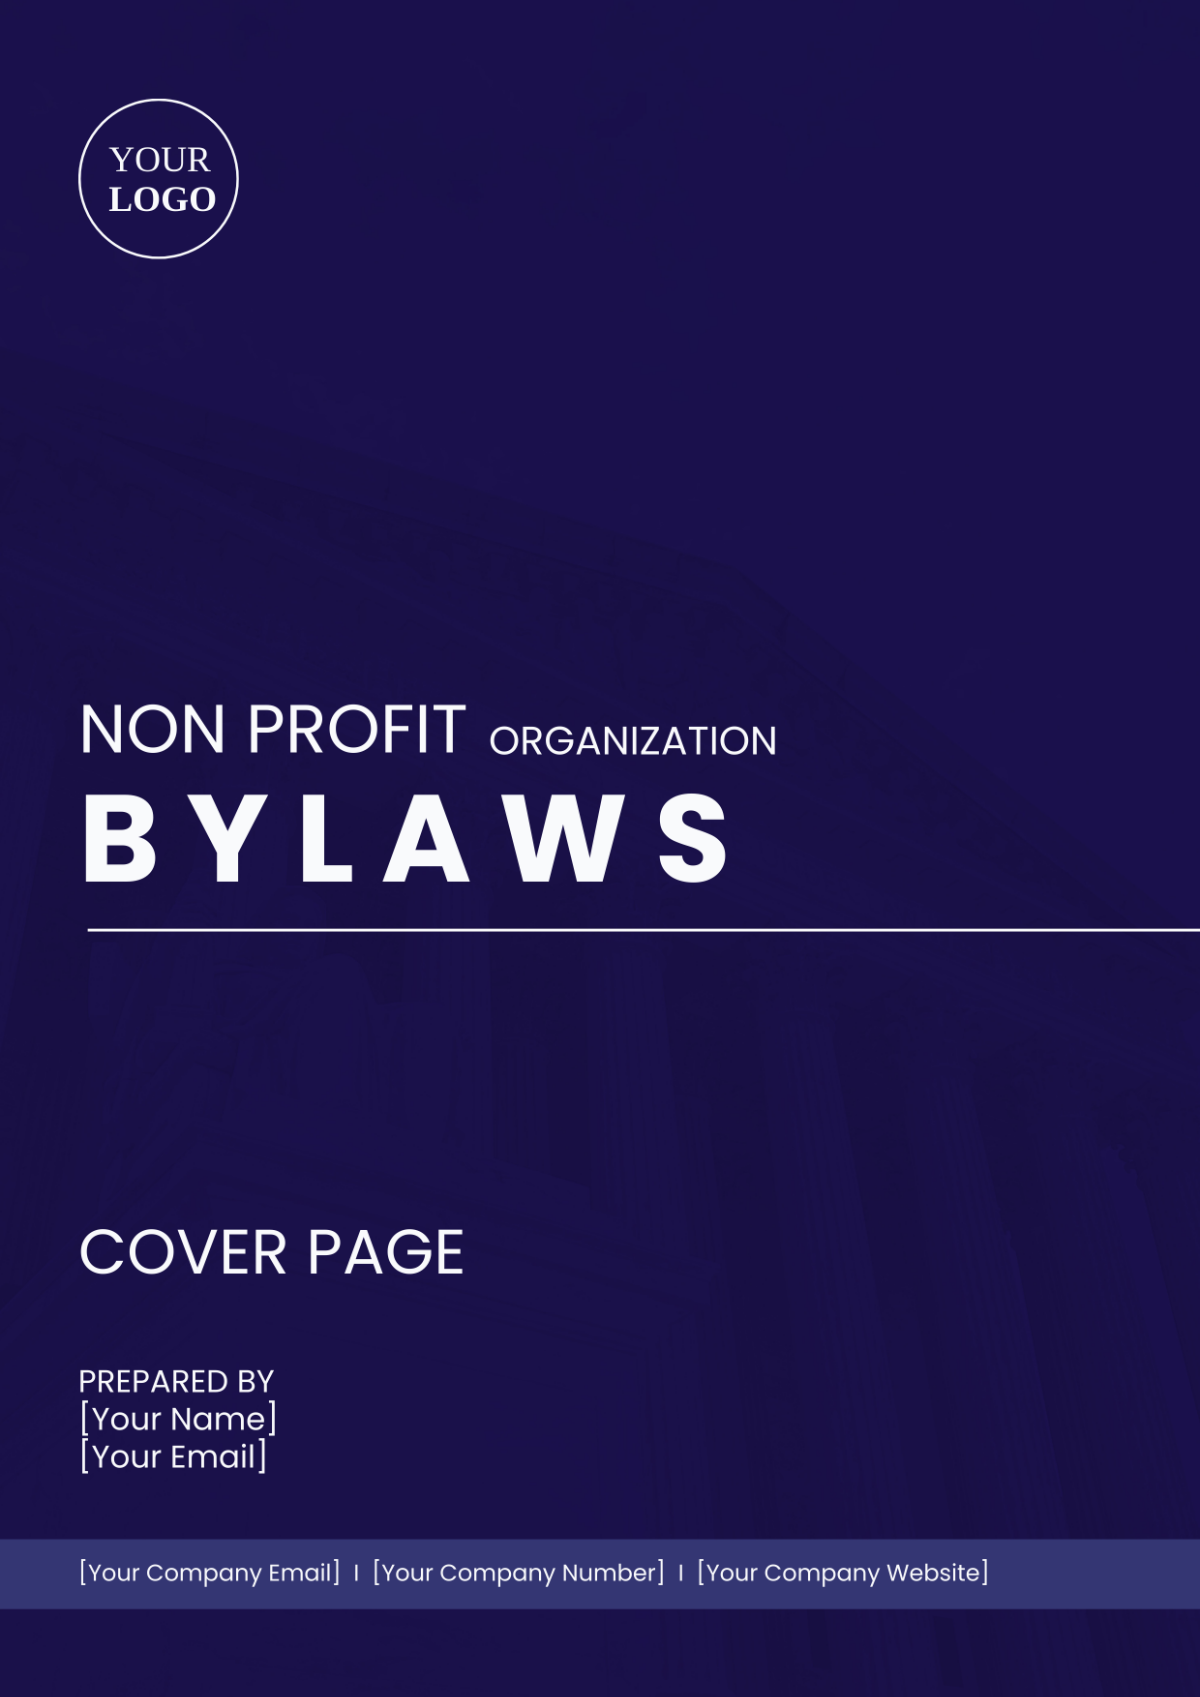 Non Profit Organization Bylaws Cover Page